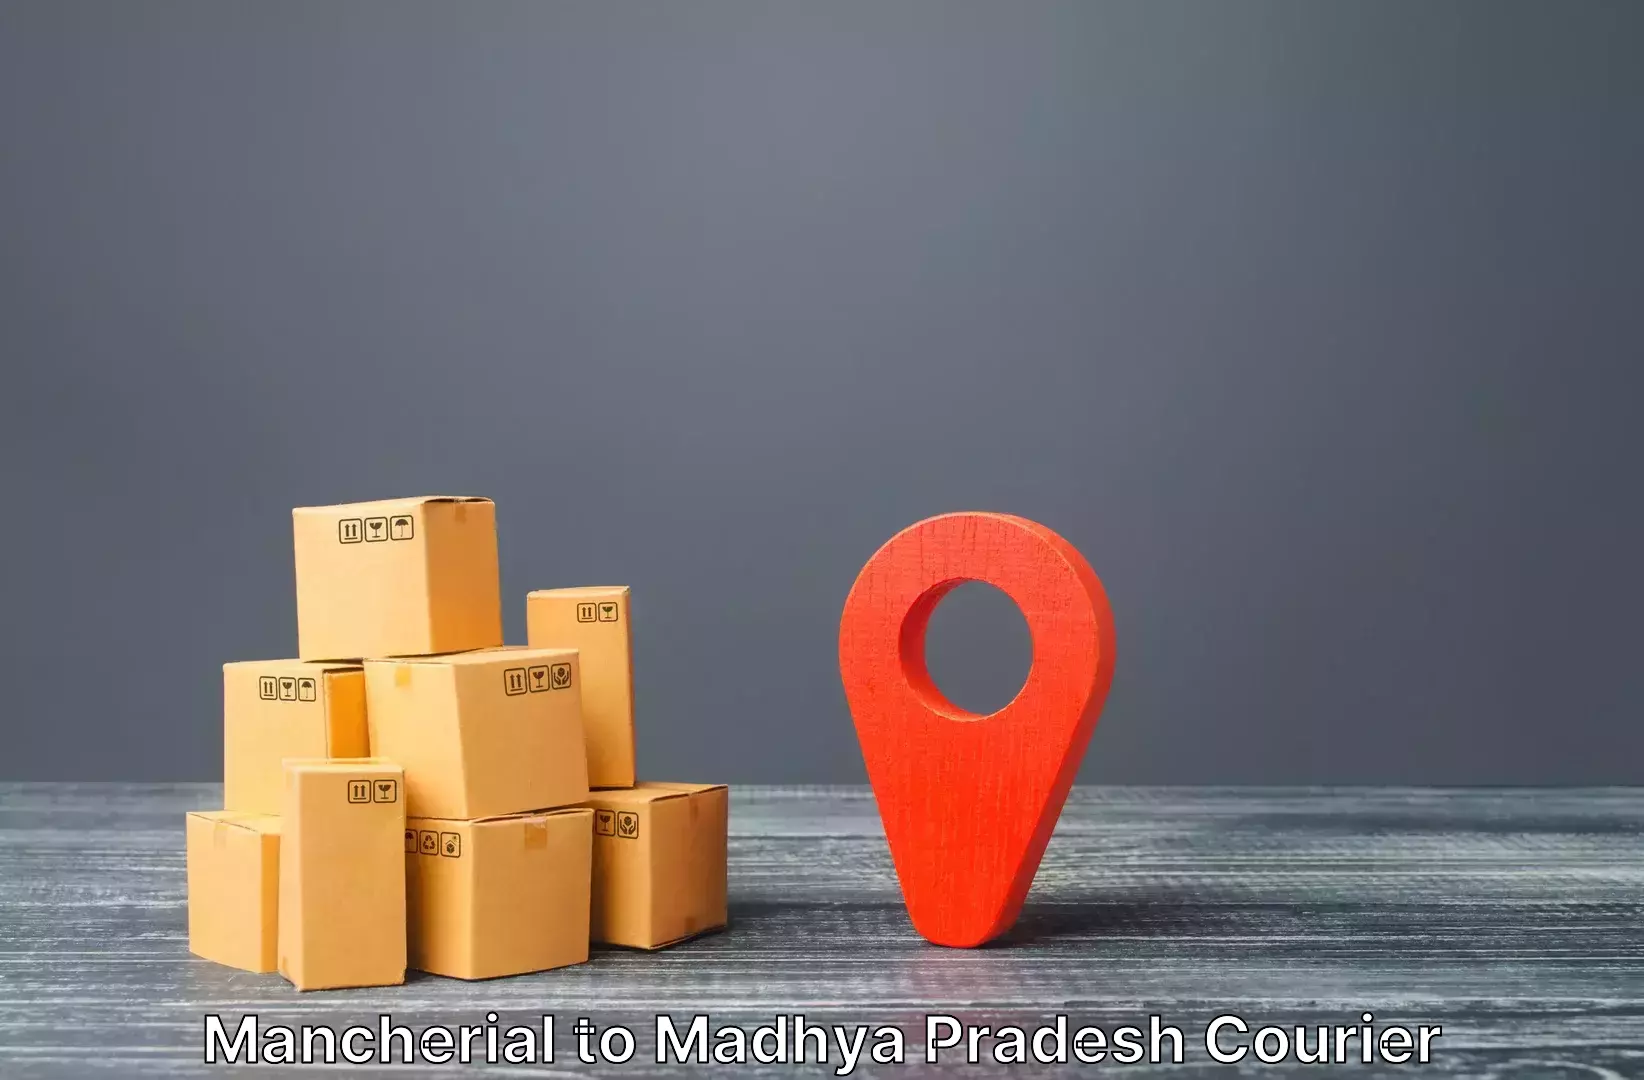 Luggage shipping service in Mancherial to Gwalior